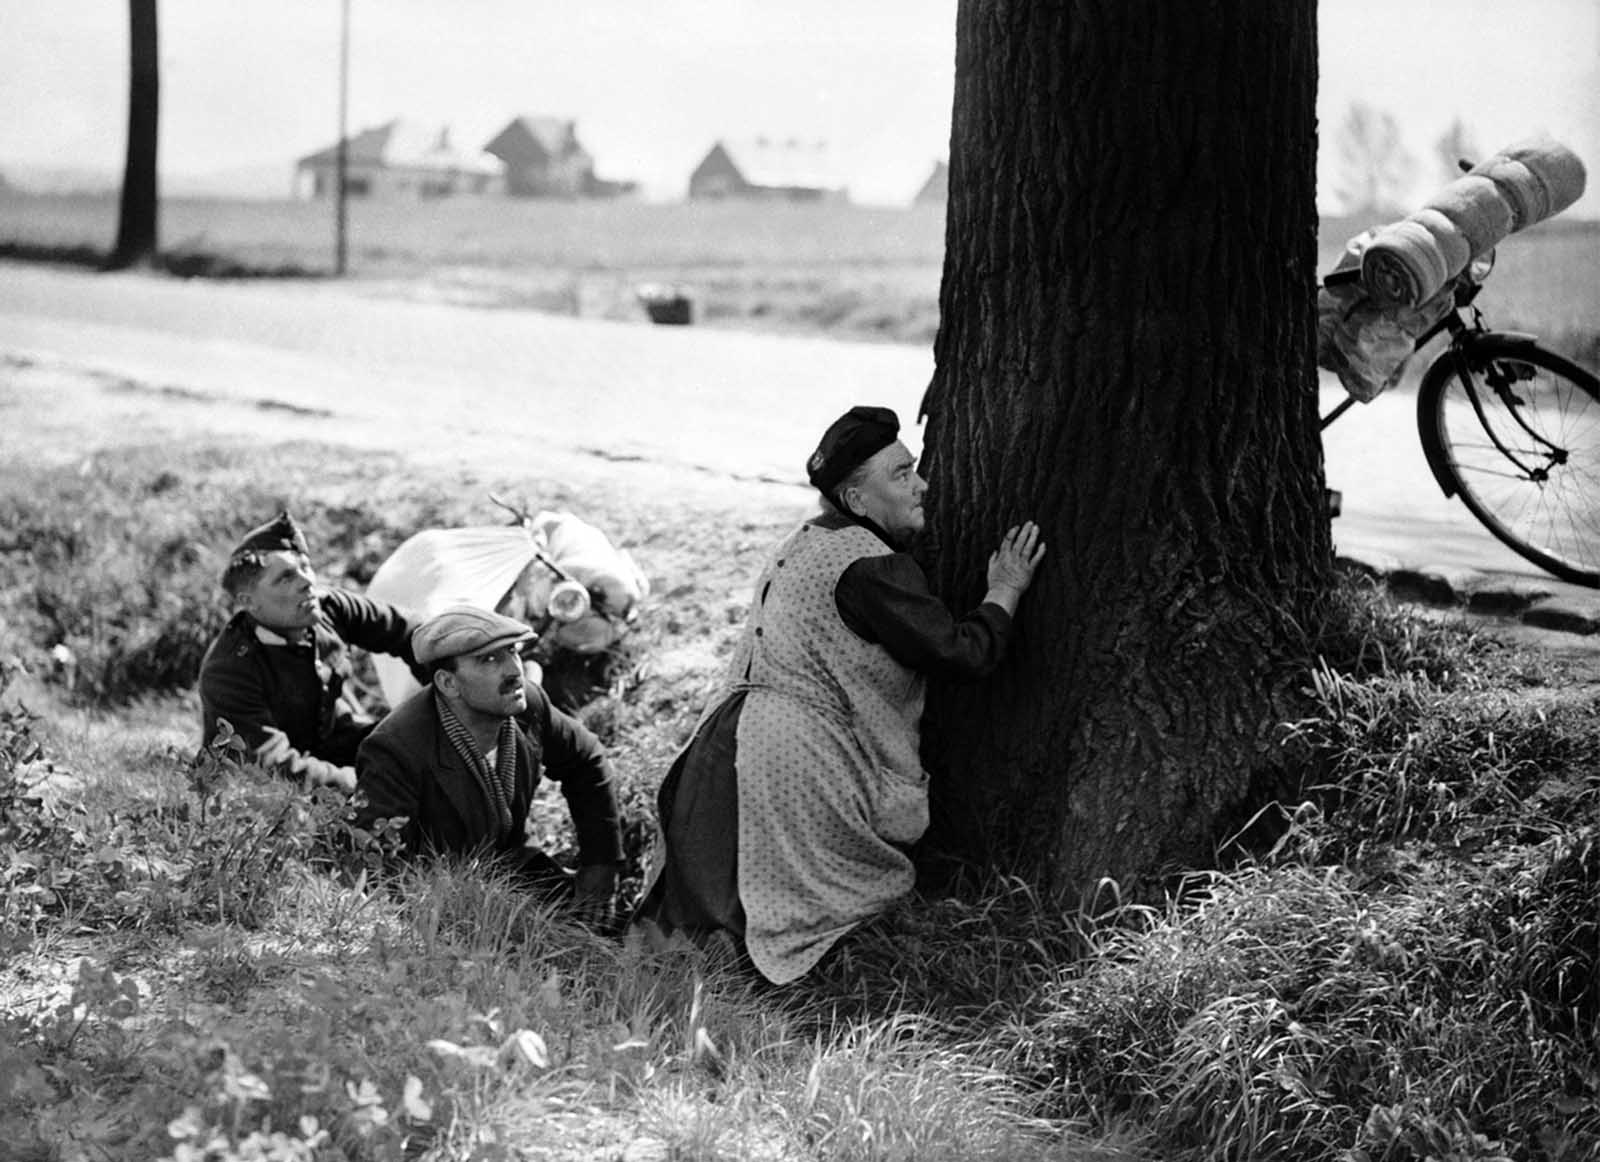 A woman, fleeing from her home with the few possessions she can carry, takes cover behind a tree by the roadside, somewhere in Belgium, on May 18, 1940, during an aerial attack by Nazi planes. Her bicycle, with her belongings tied to it, rests against the tree, to which she clings for protection.